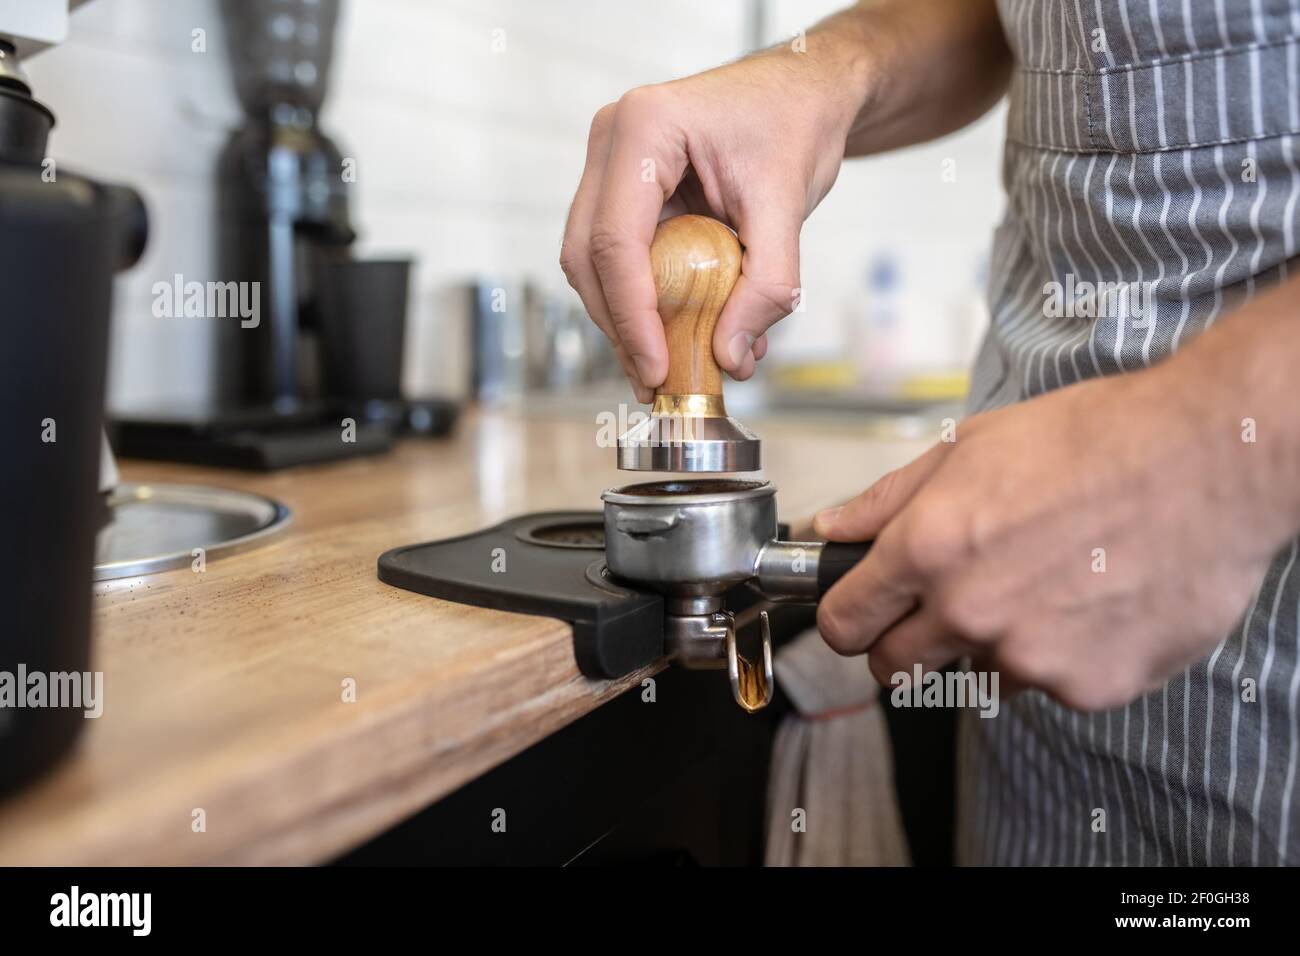 Male hands holding coffee machine filter holder Stock Photo